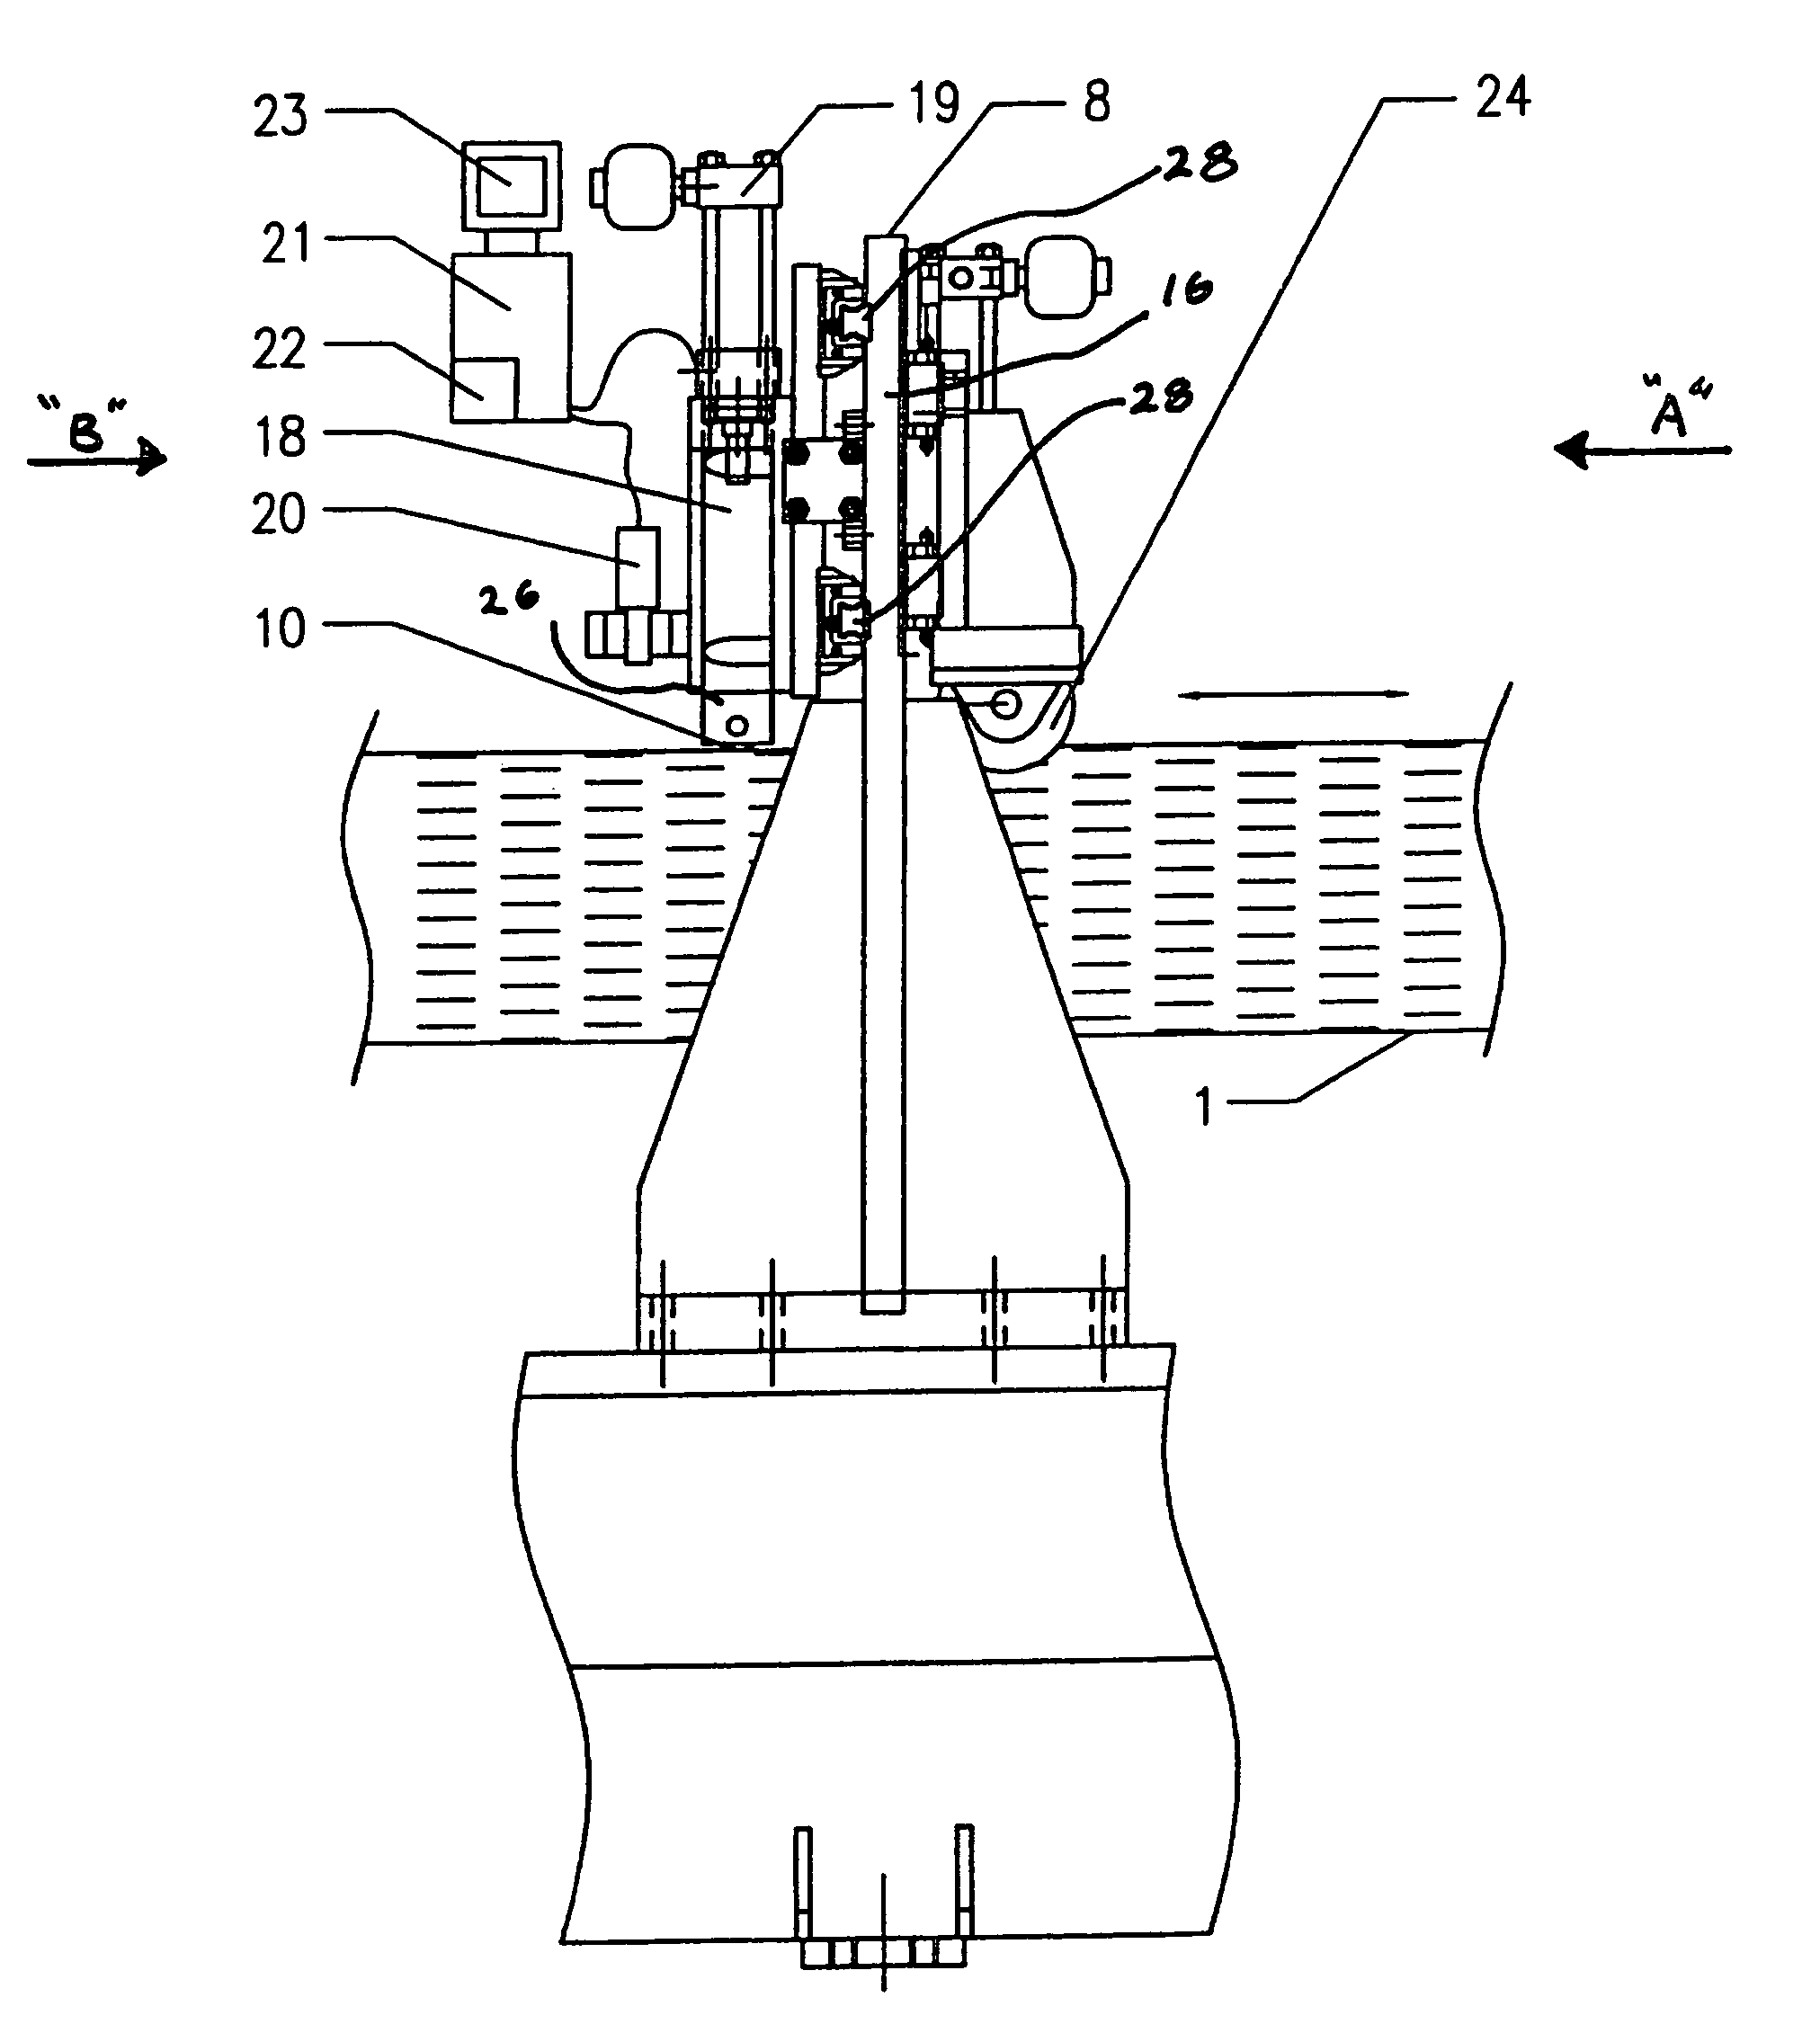 Method and apparatus to reduce the width of a slot or opening in a pipe, tube or other object